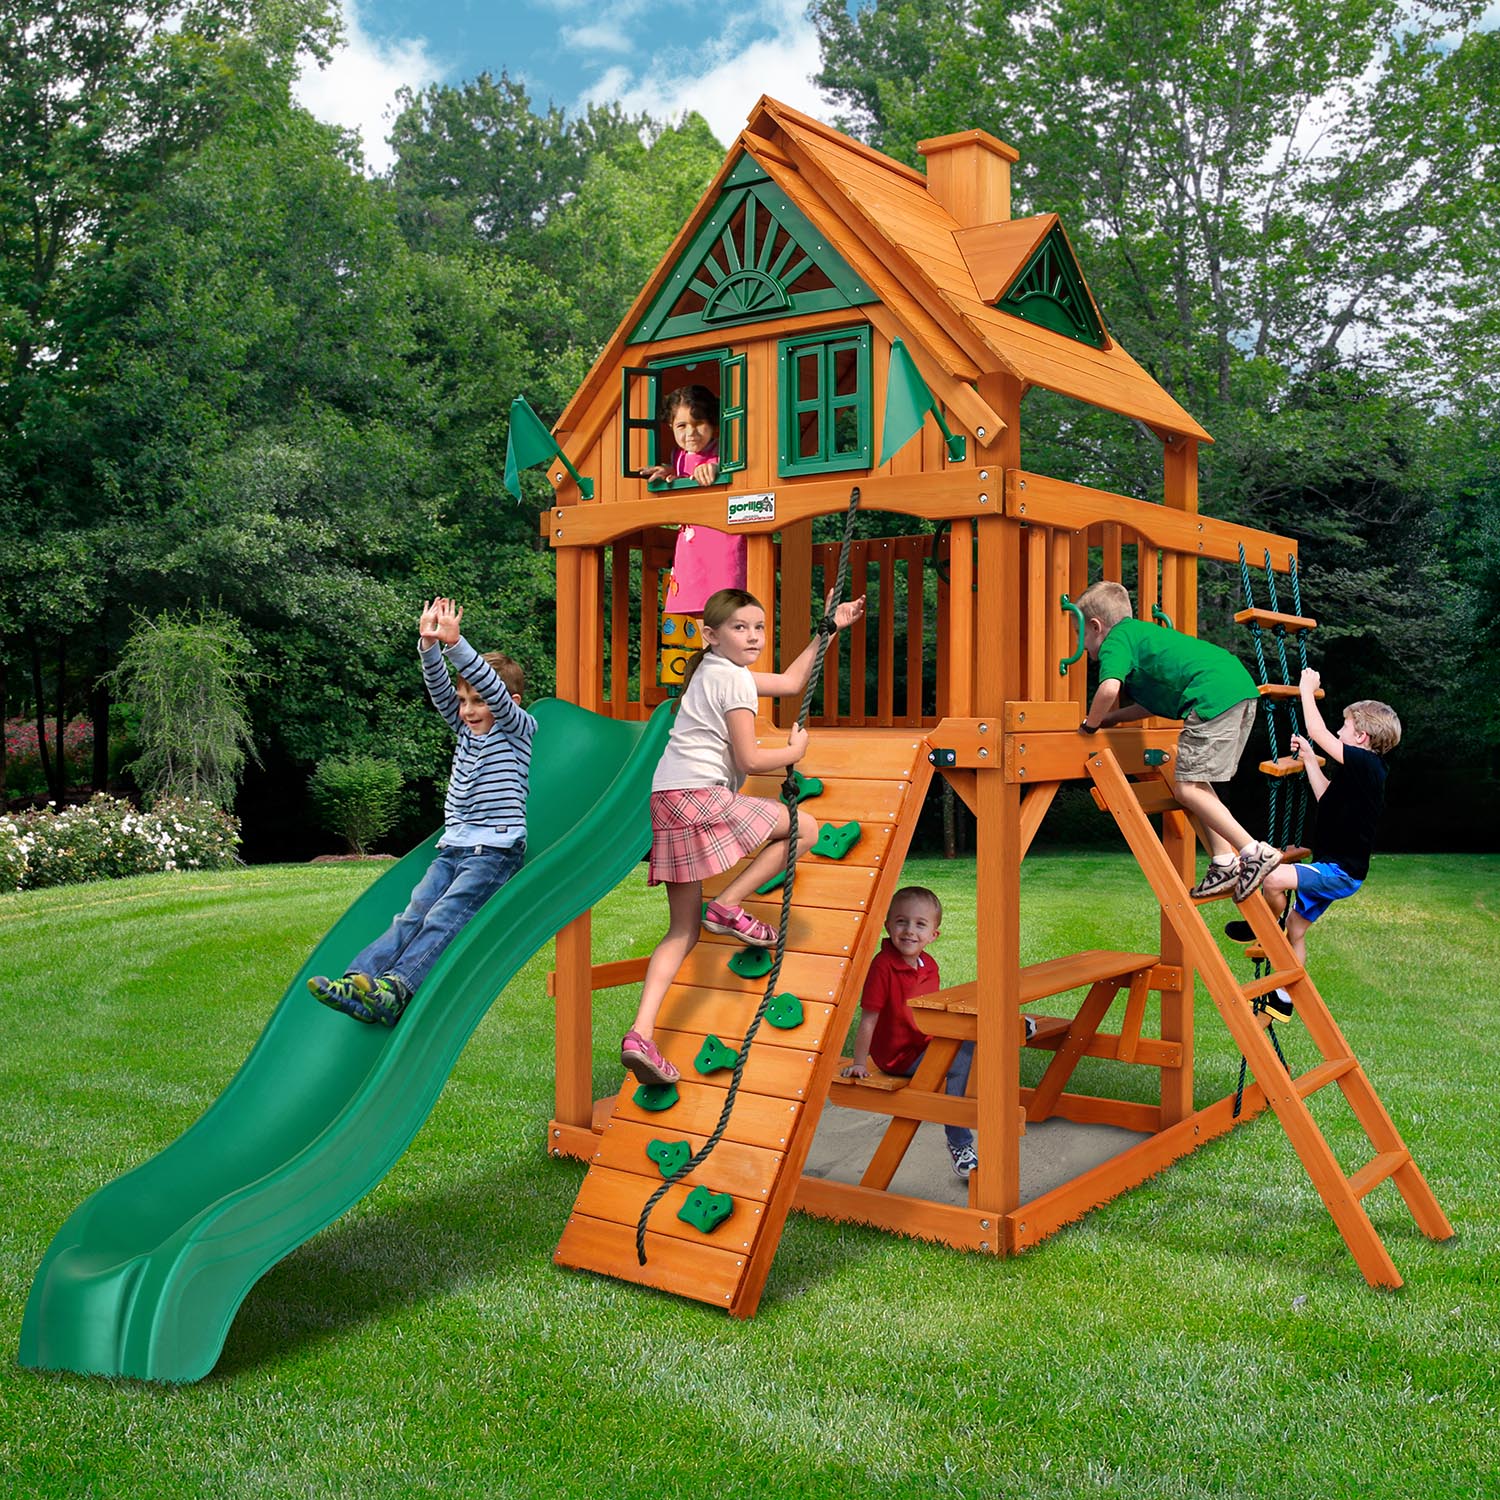 Gorilla-Playsets-Chateau-Tower-Treehouse-Wooden-Swingset